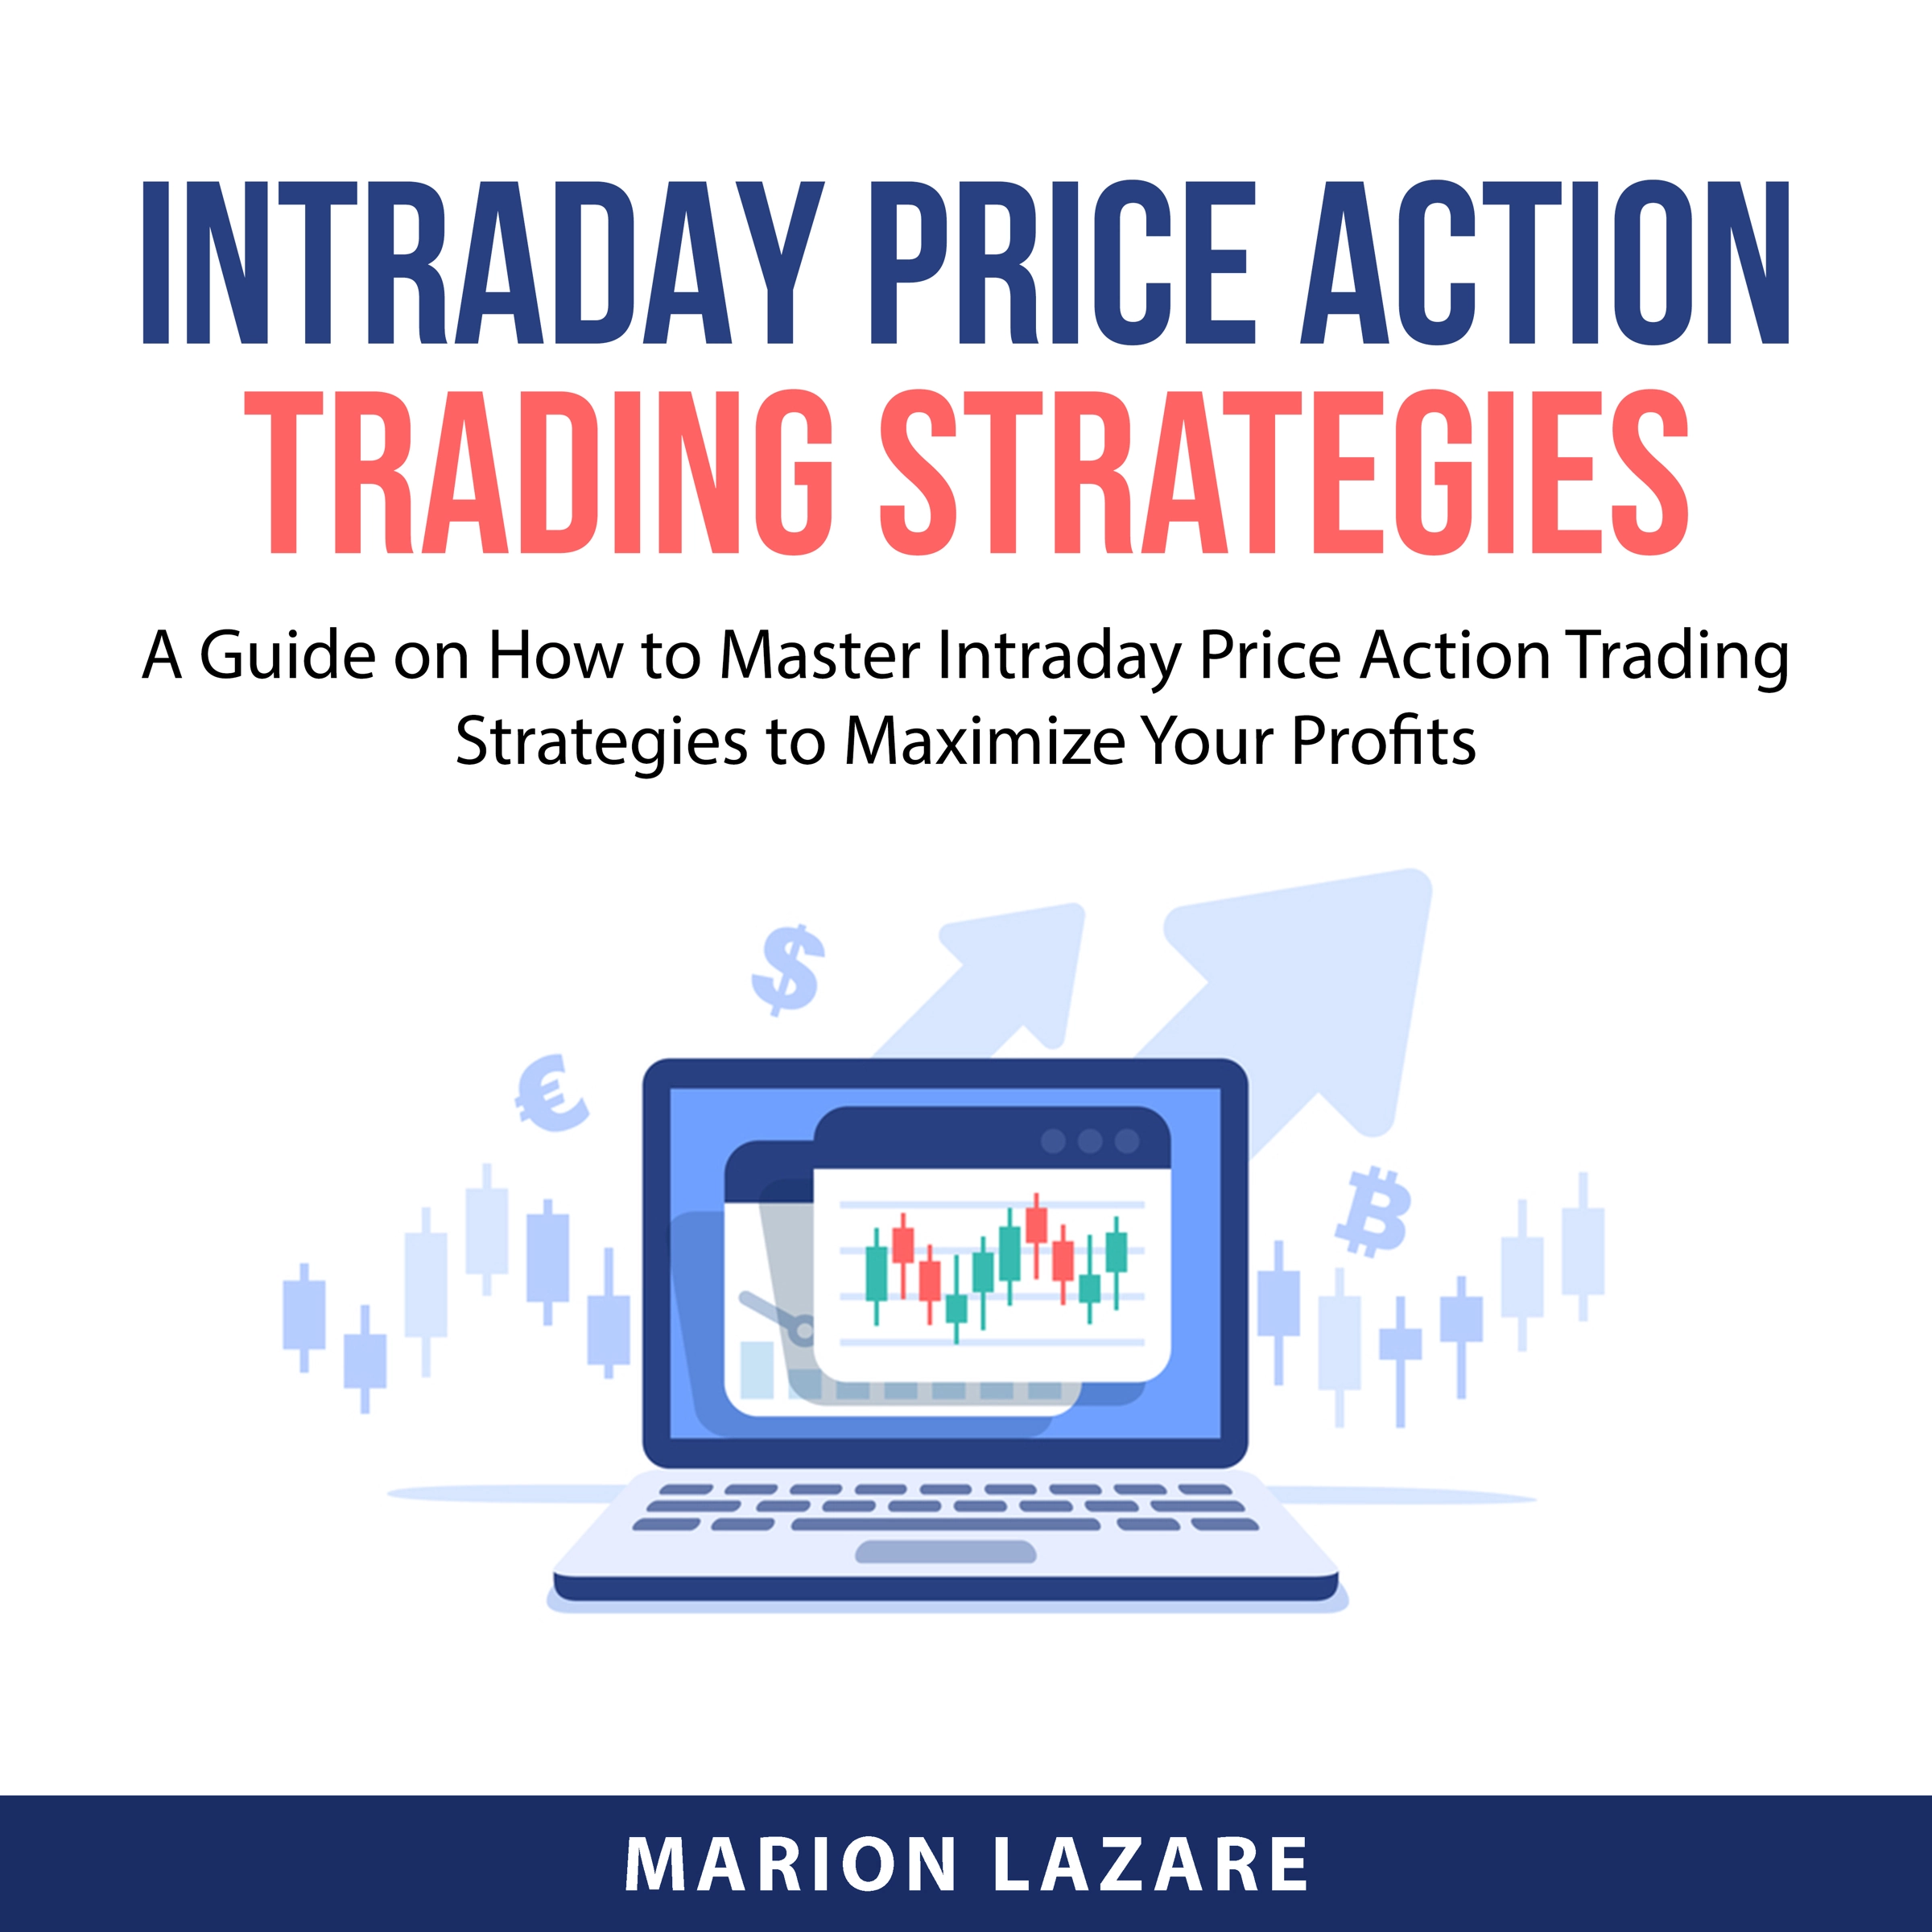 Intraday Price Action Trading Strategies Audiobook by Marion Lazare